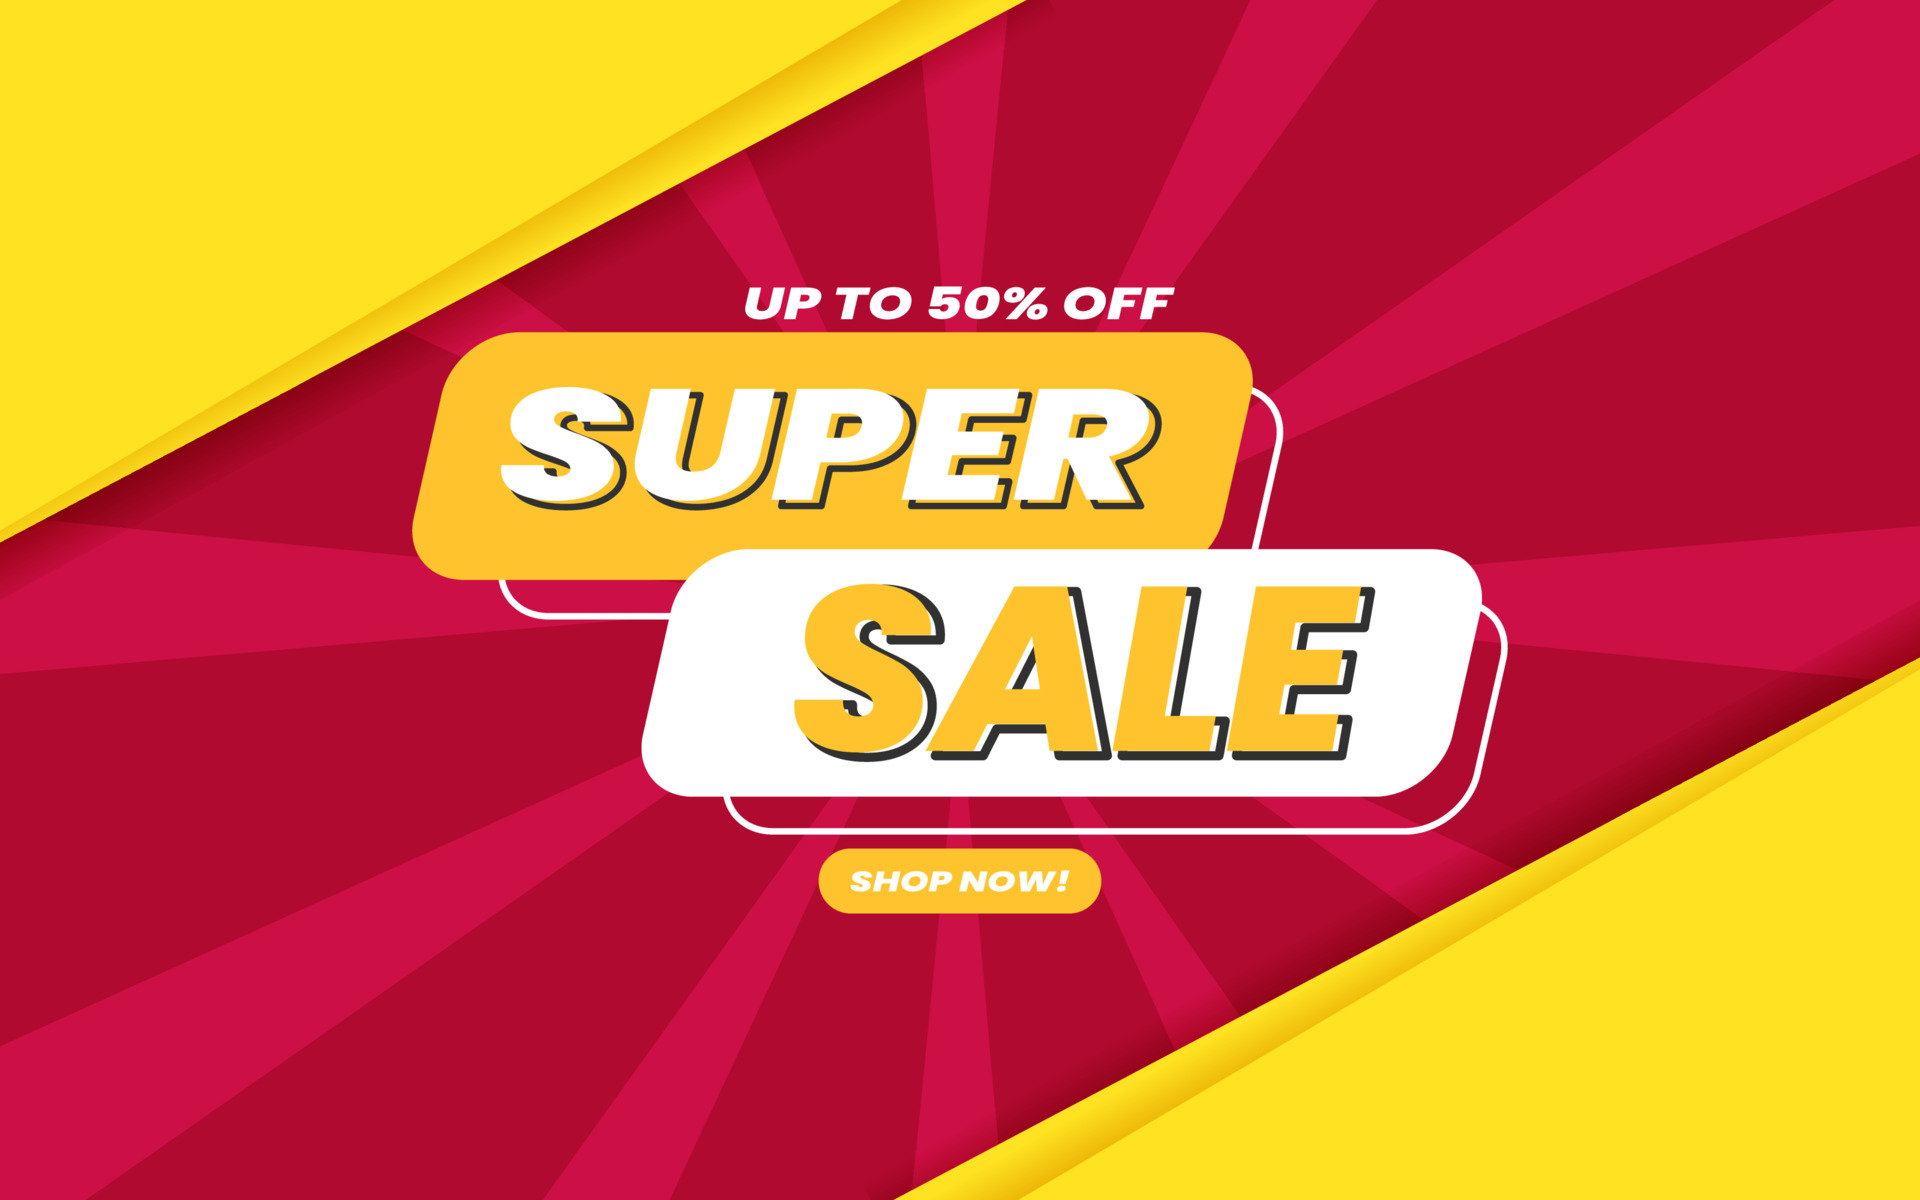 https://static.vecteezy.com/system/resources/previews/007/100/575/original/super-sale-up-to-50-percent-off-all-item-store-banner-promotion-template-with-blue-background-illustration-vector.jpg